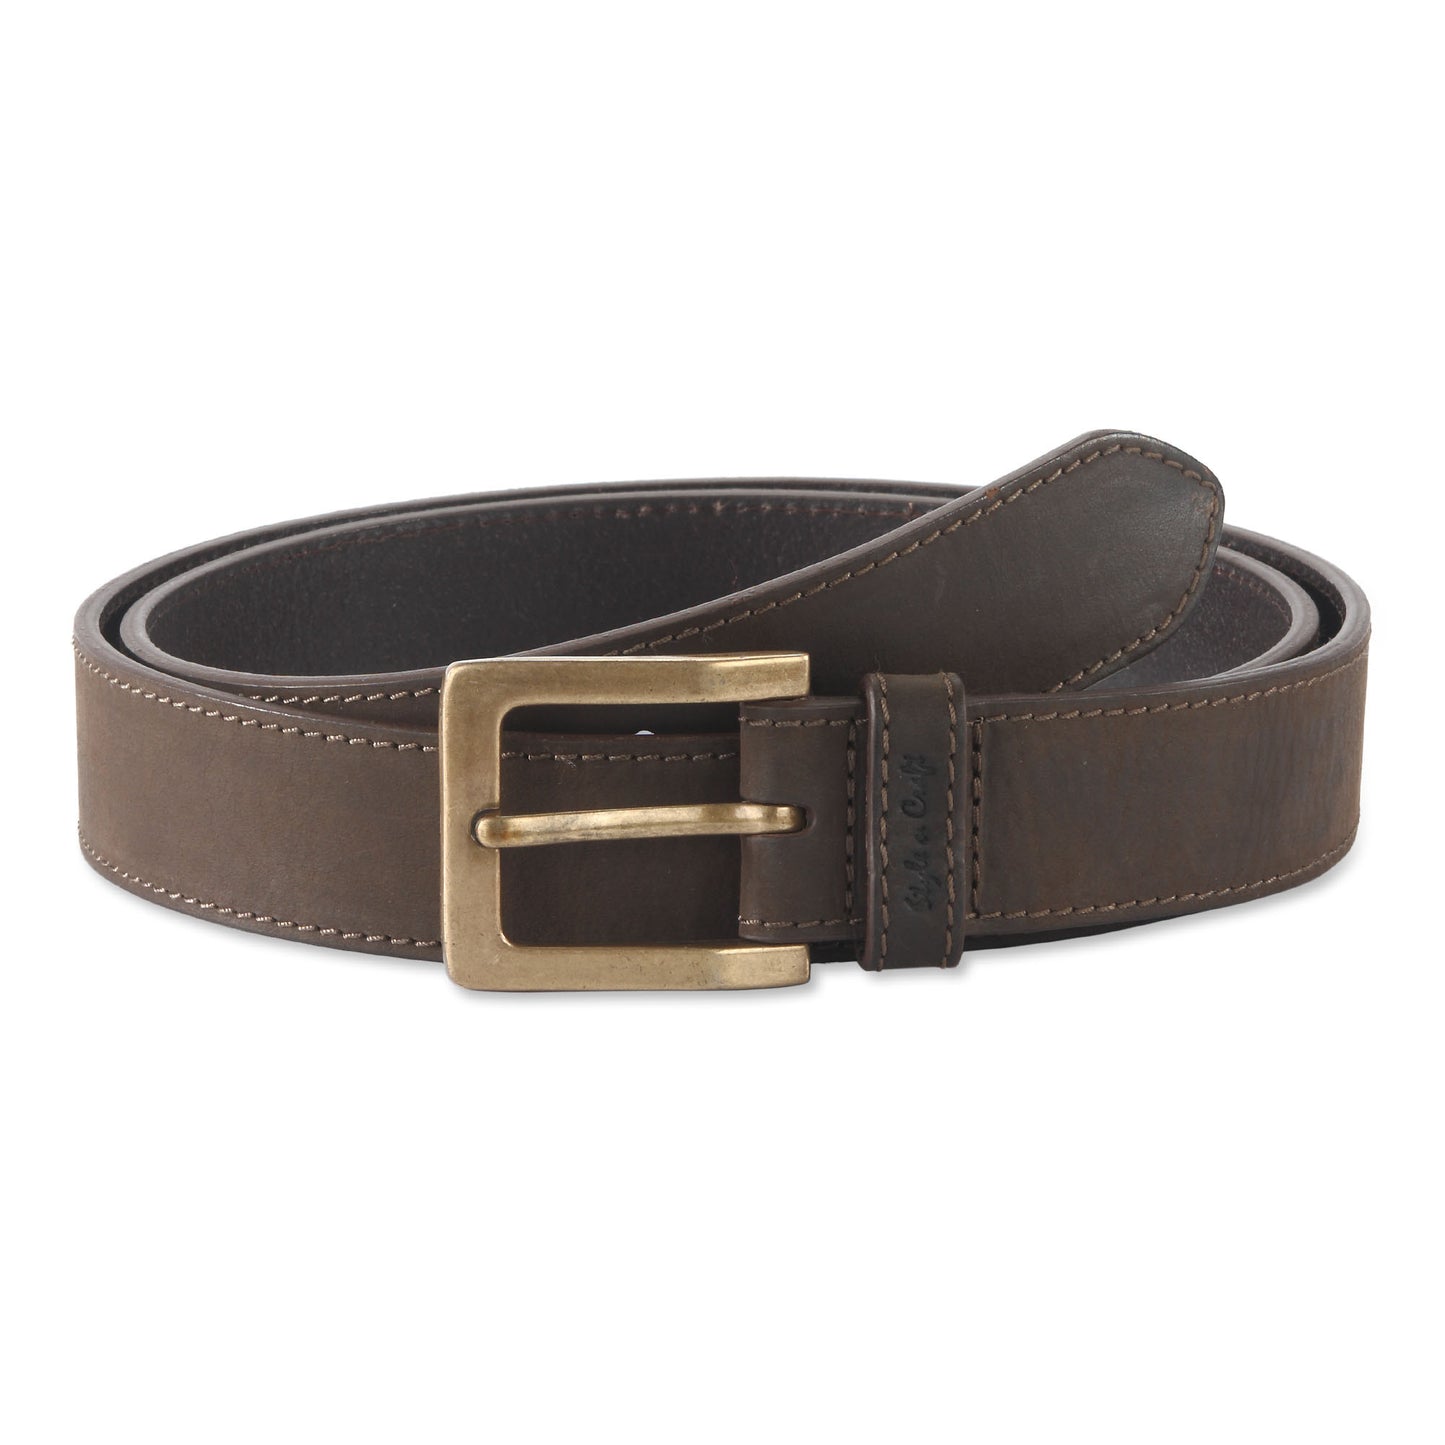 392702 - one and a half inch wide leather belt in dark chocolate brown color top grain hunter leather - front view